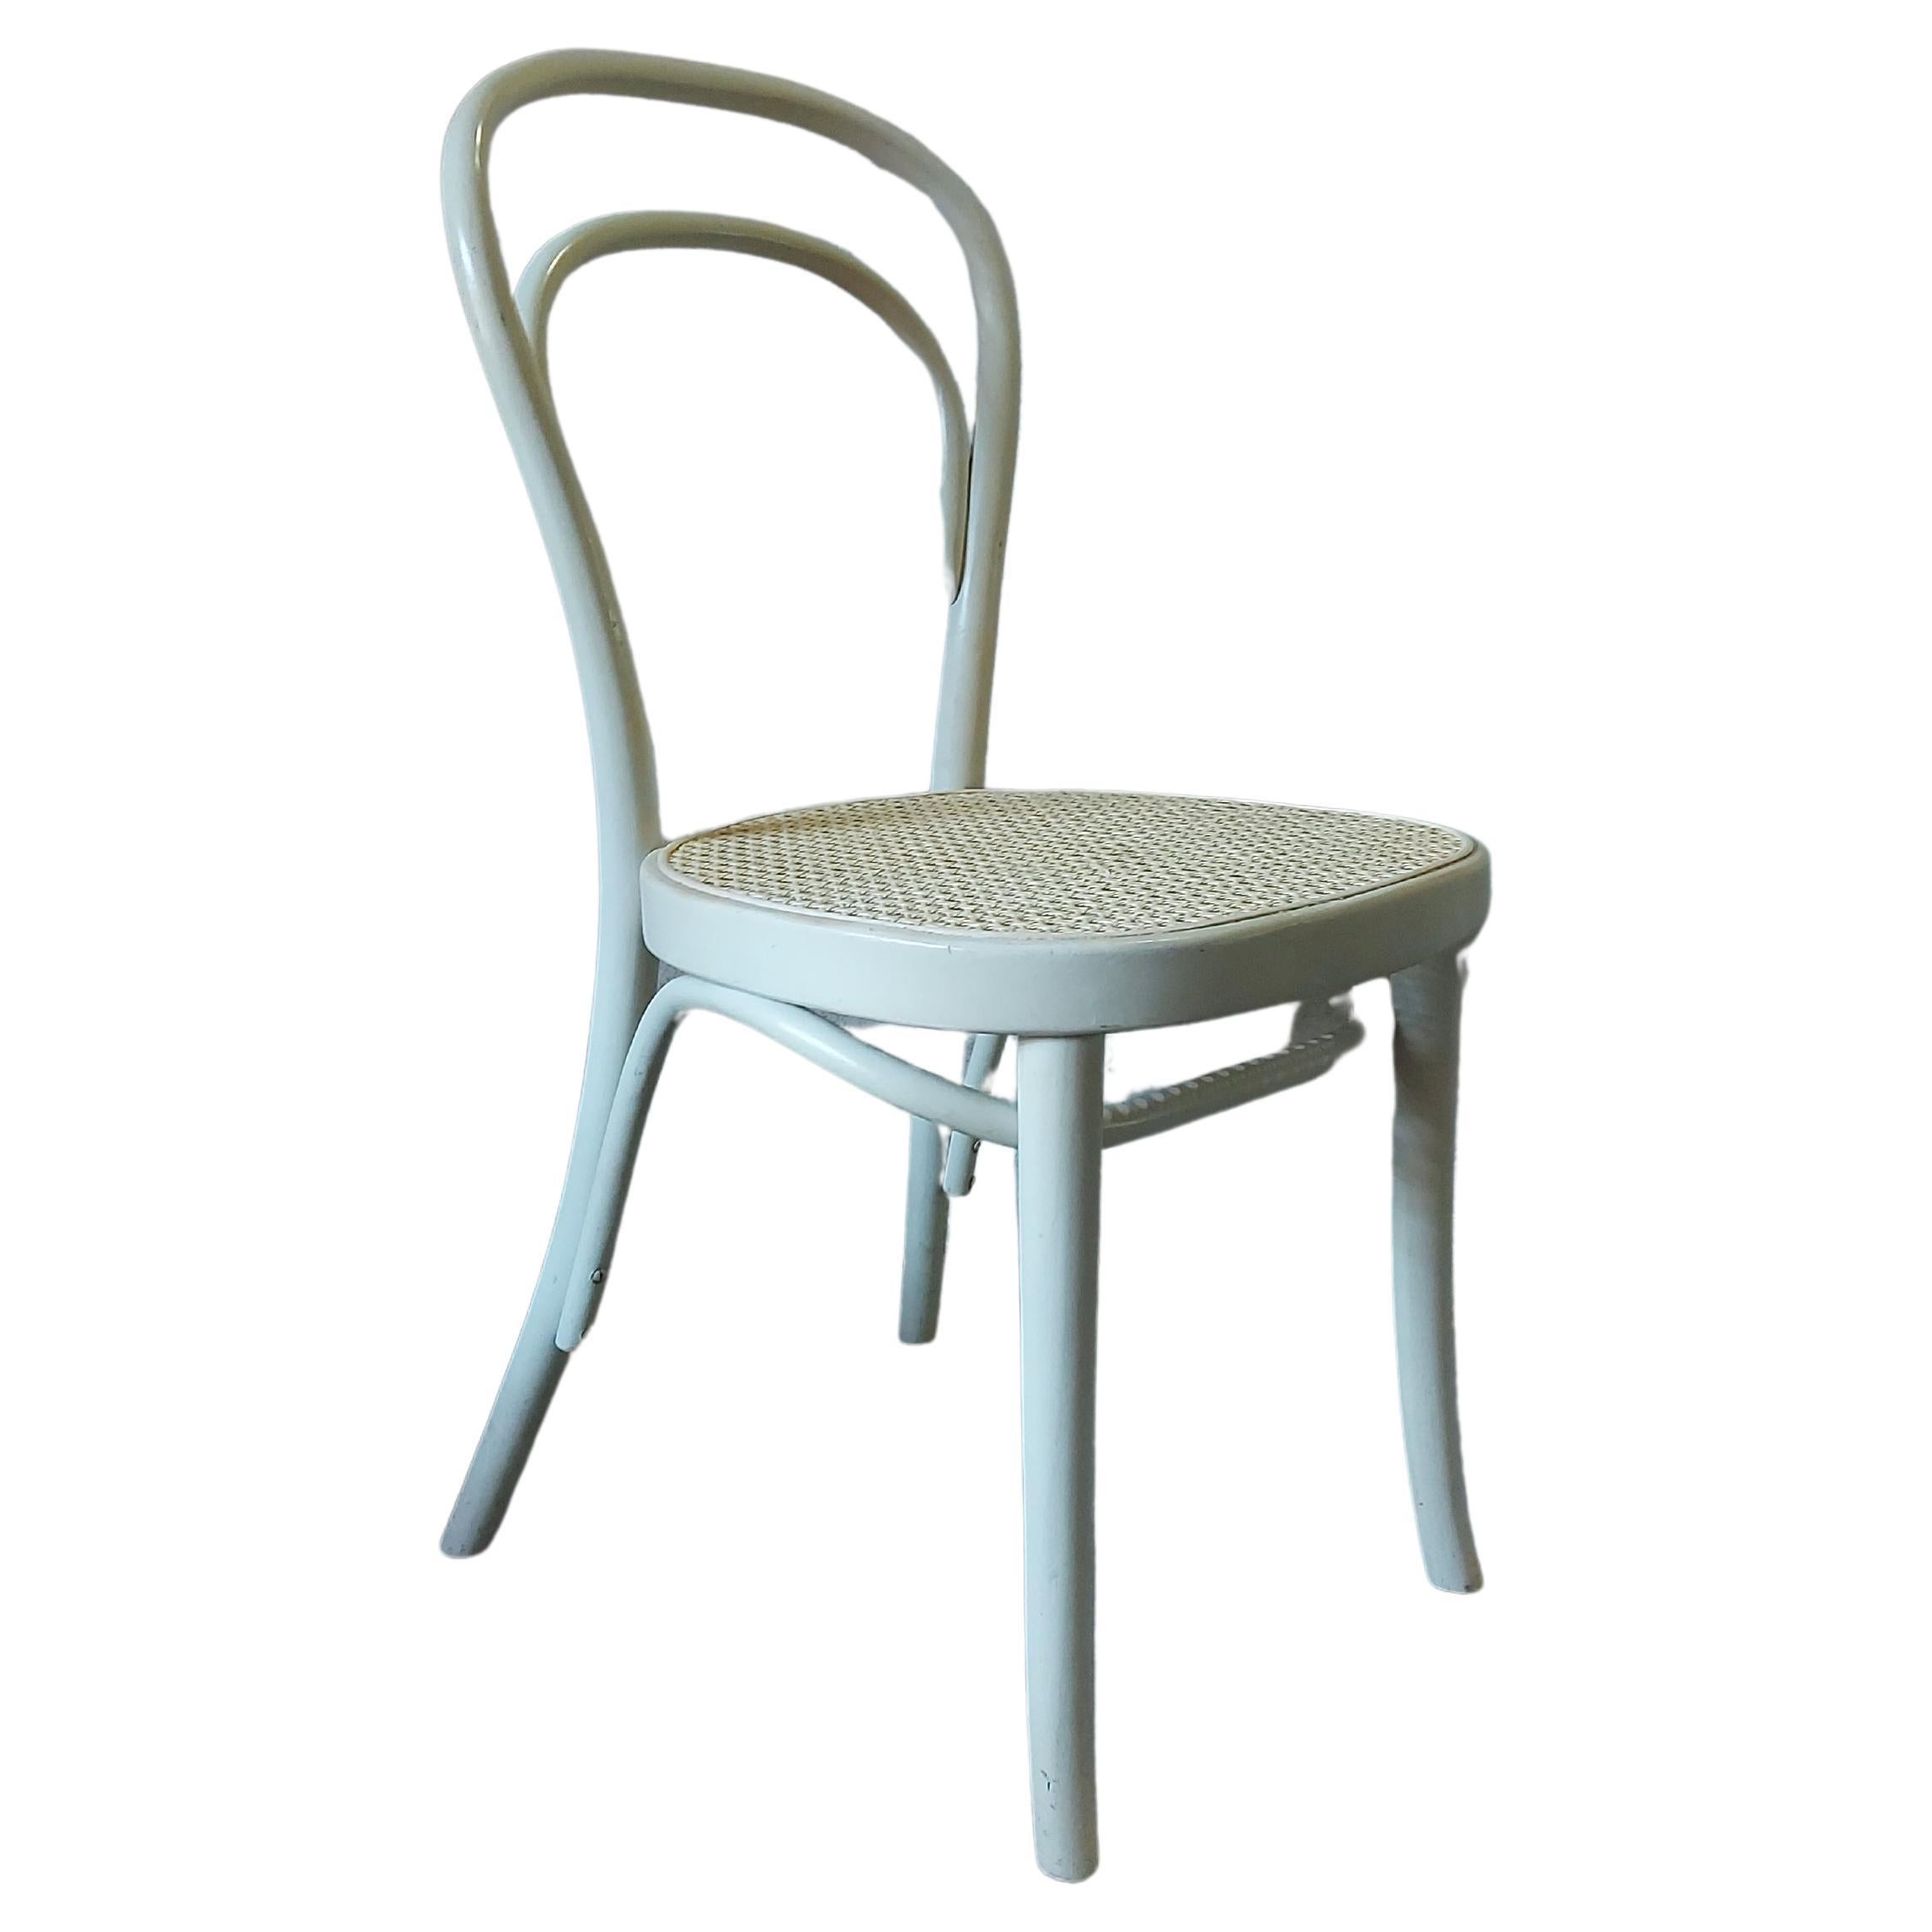 How old are bentwood rockers?